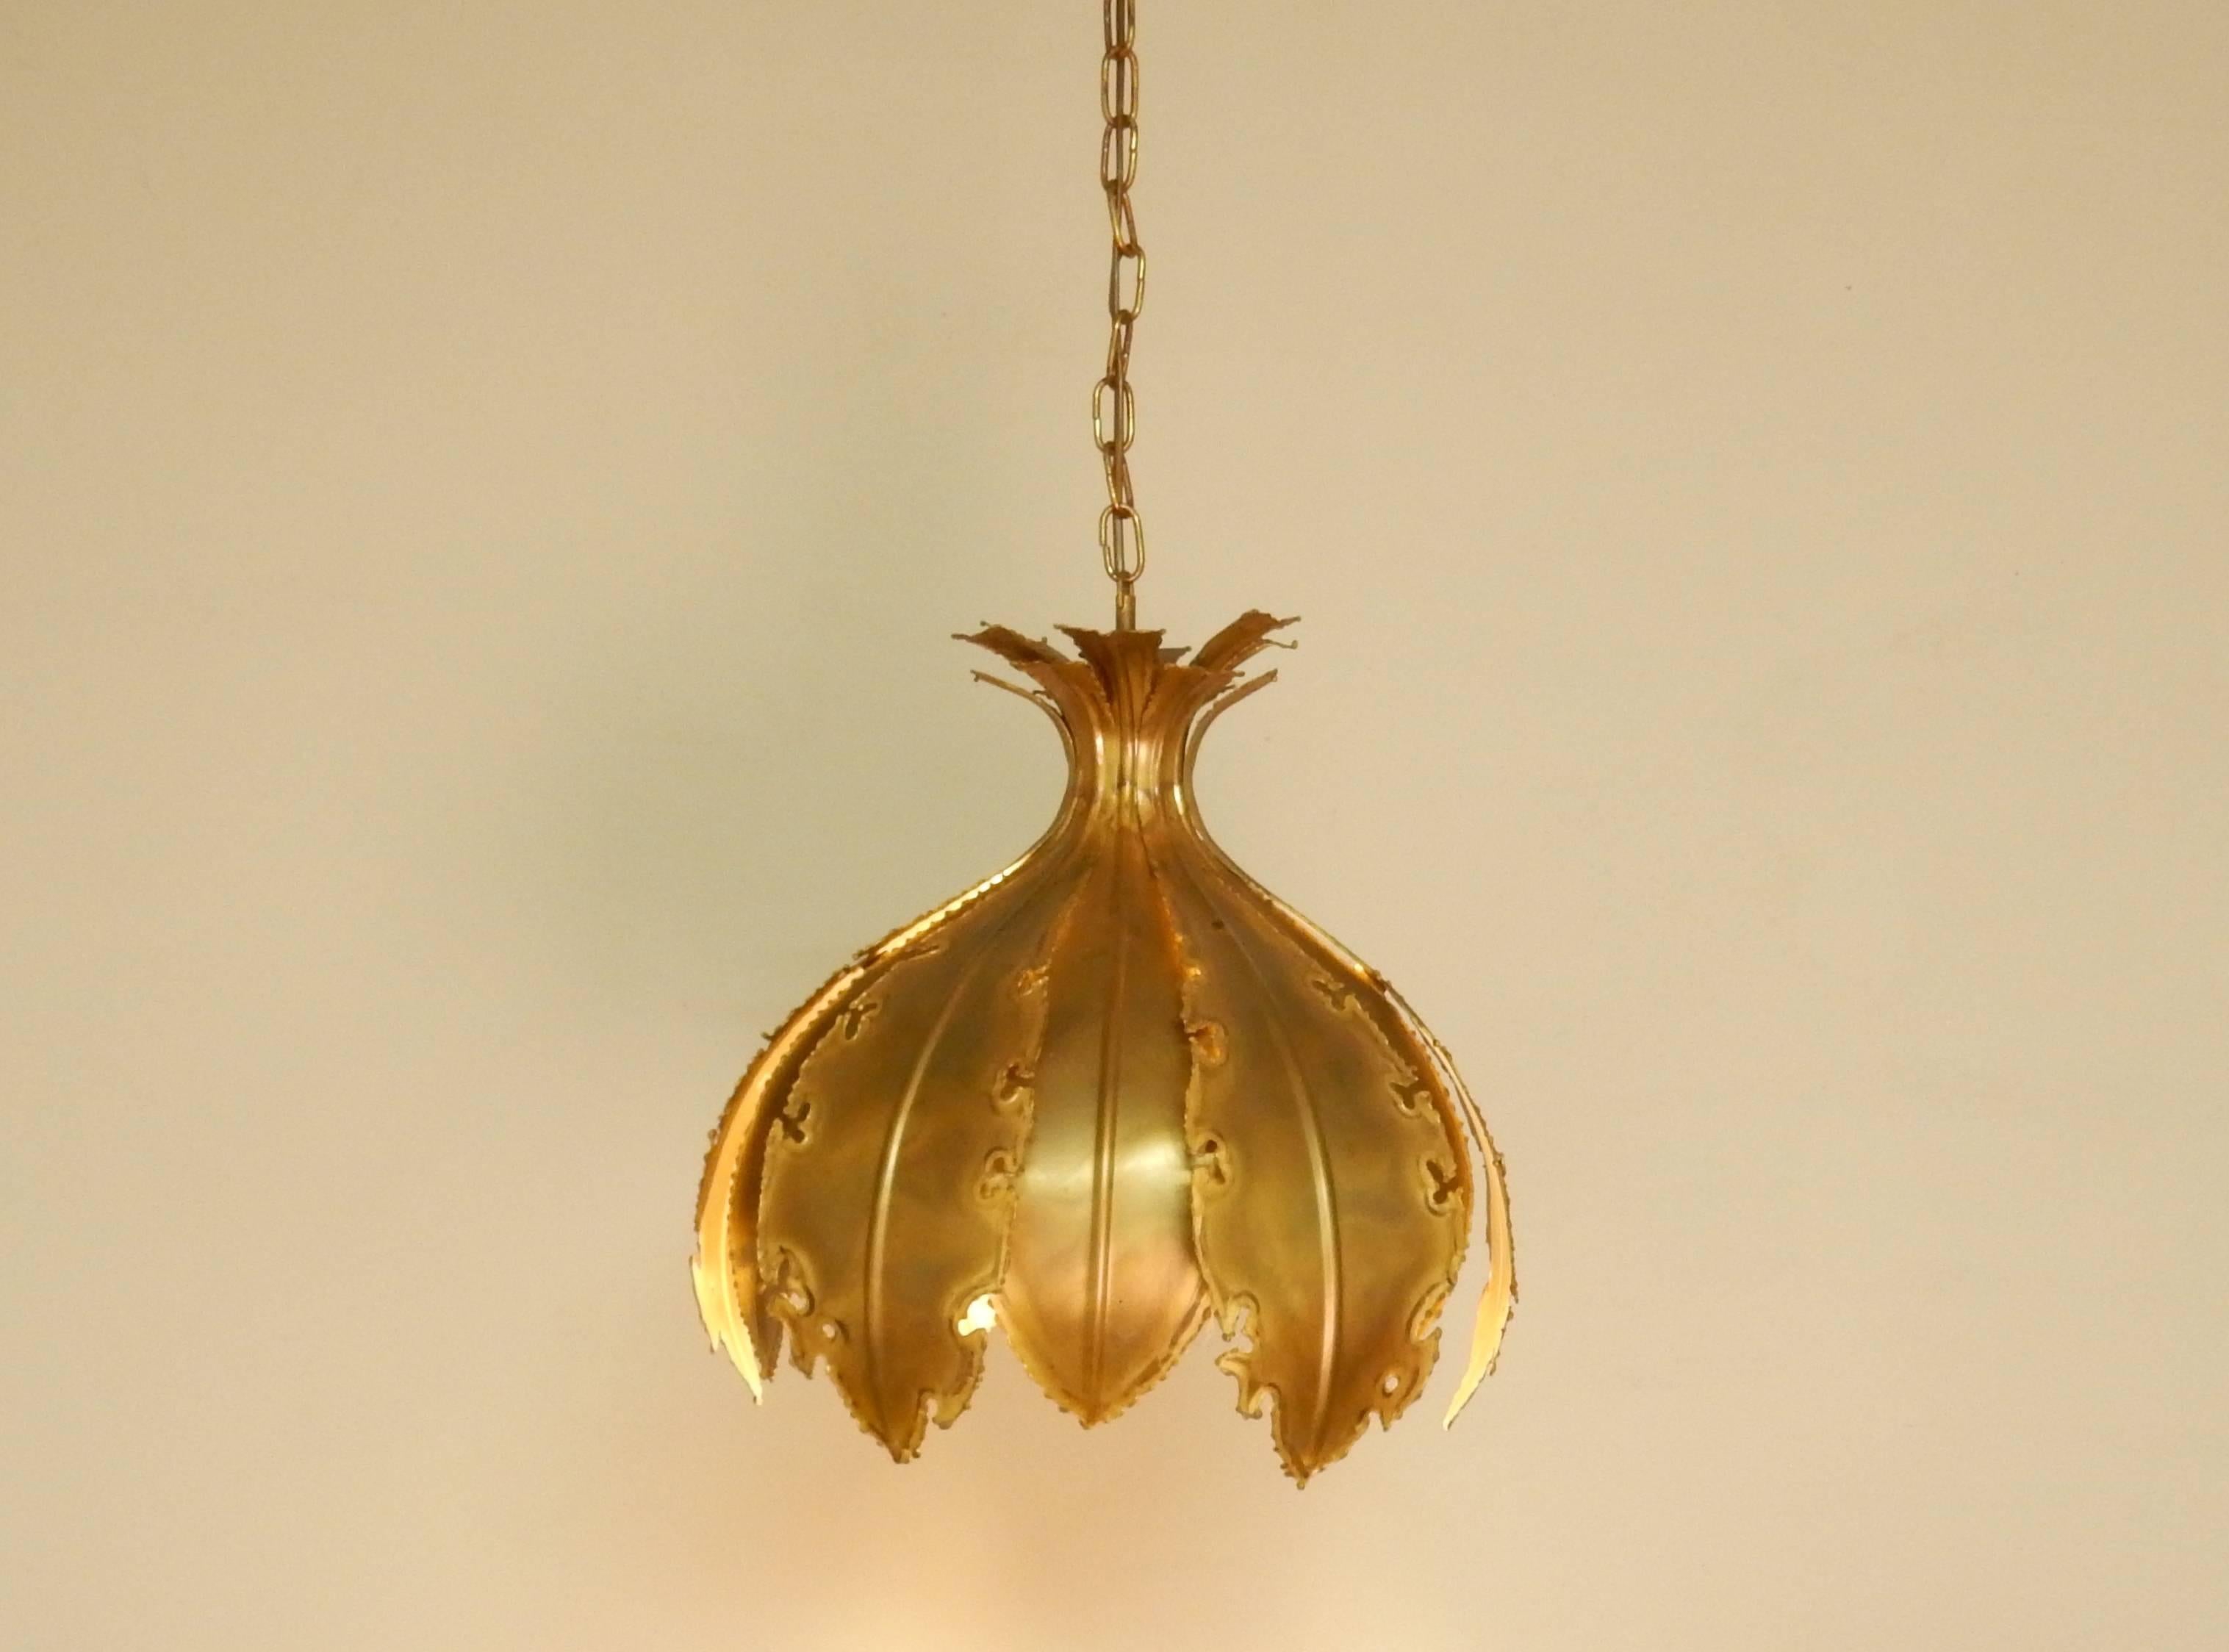 This big Brutalist pendant light has the shape of a flower, an onion or artichoke. The use and work of material makes this light an impressive item. This light comes with the original and labelled ceiling rose, as pictured.